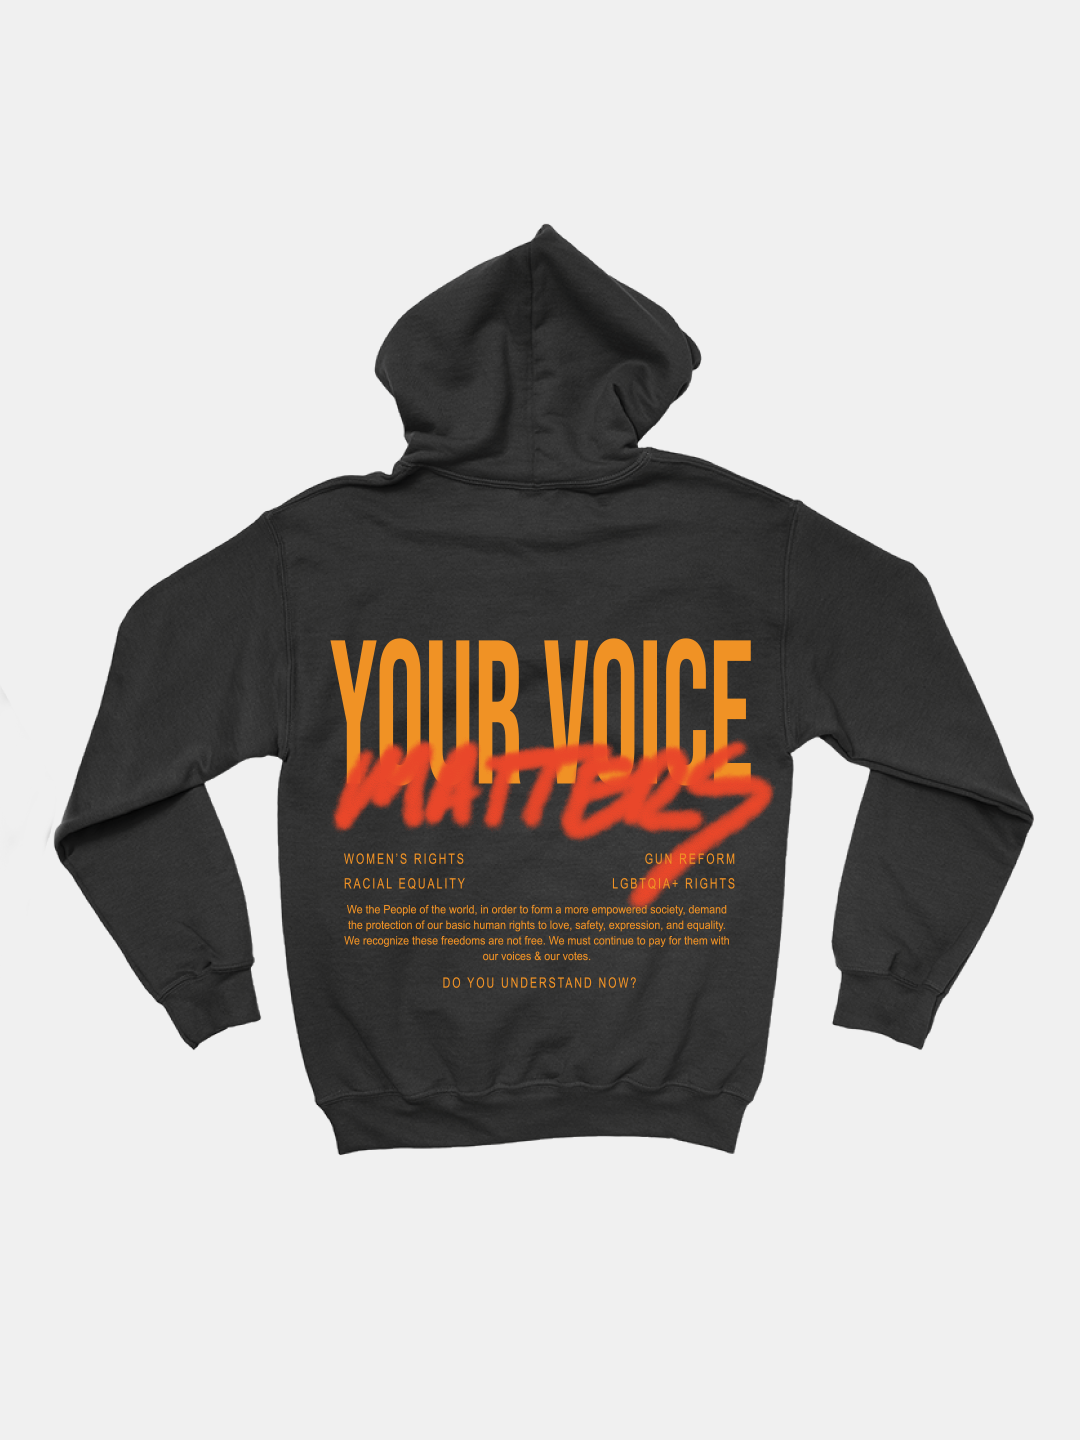 DO YOU UNDERSTAND NOW? GRAPHIC HOODIE - BACK